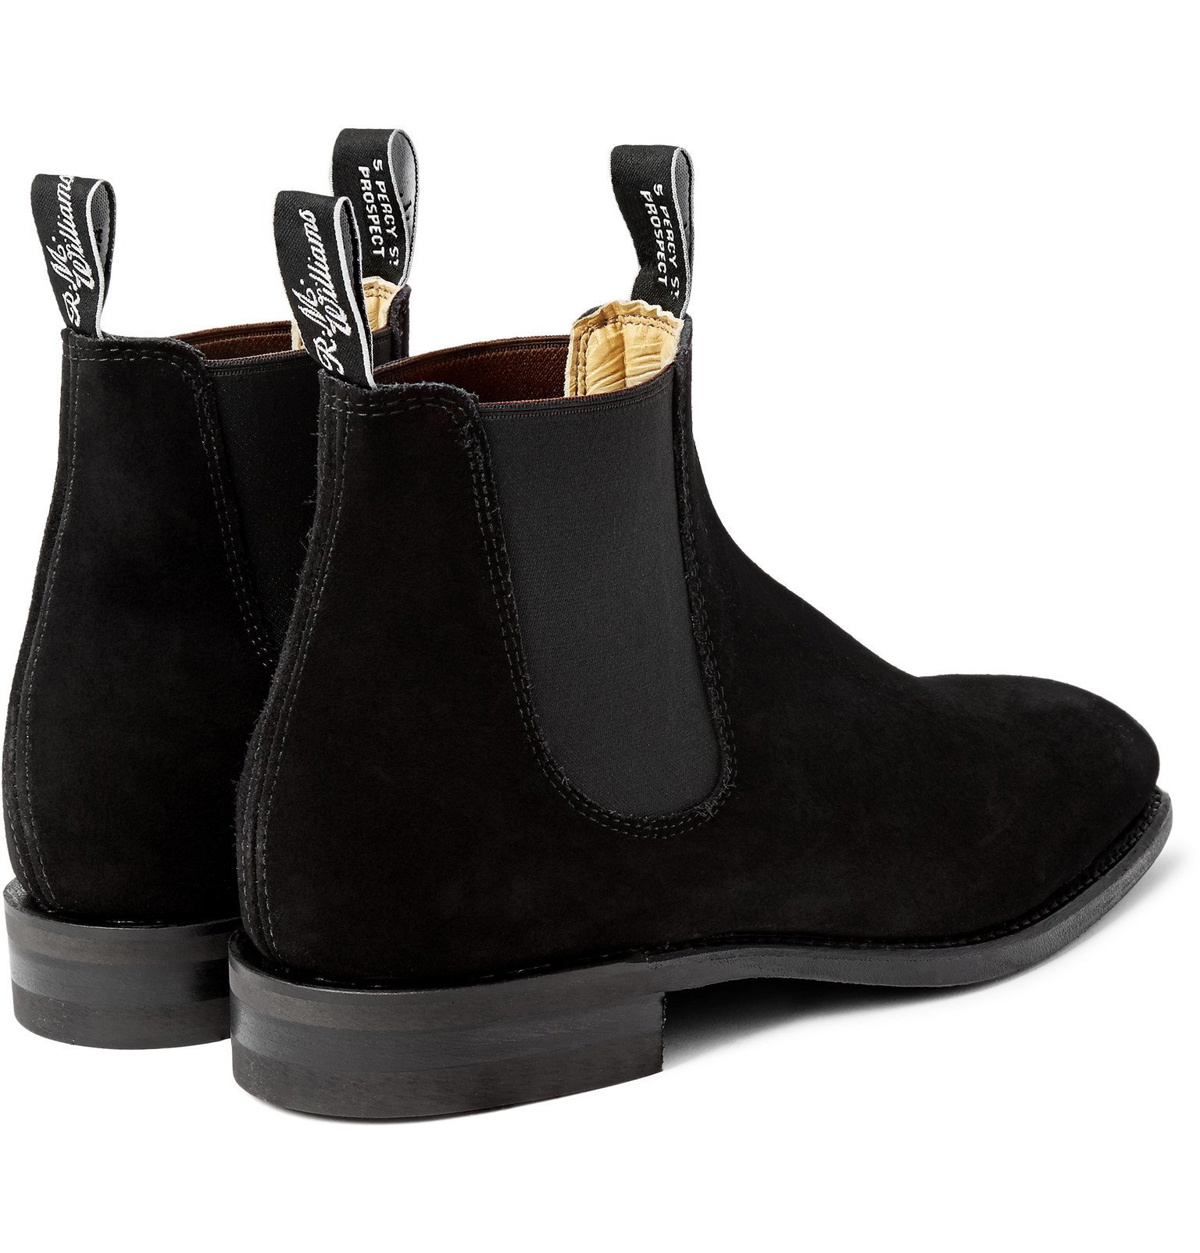 Black Craftsman Boots, R.M.Williams Chelsea Boots